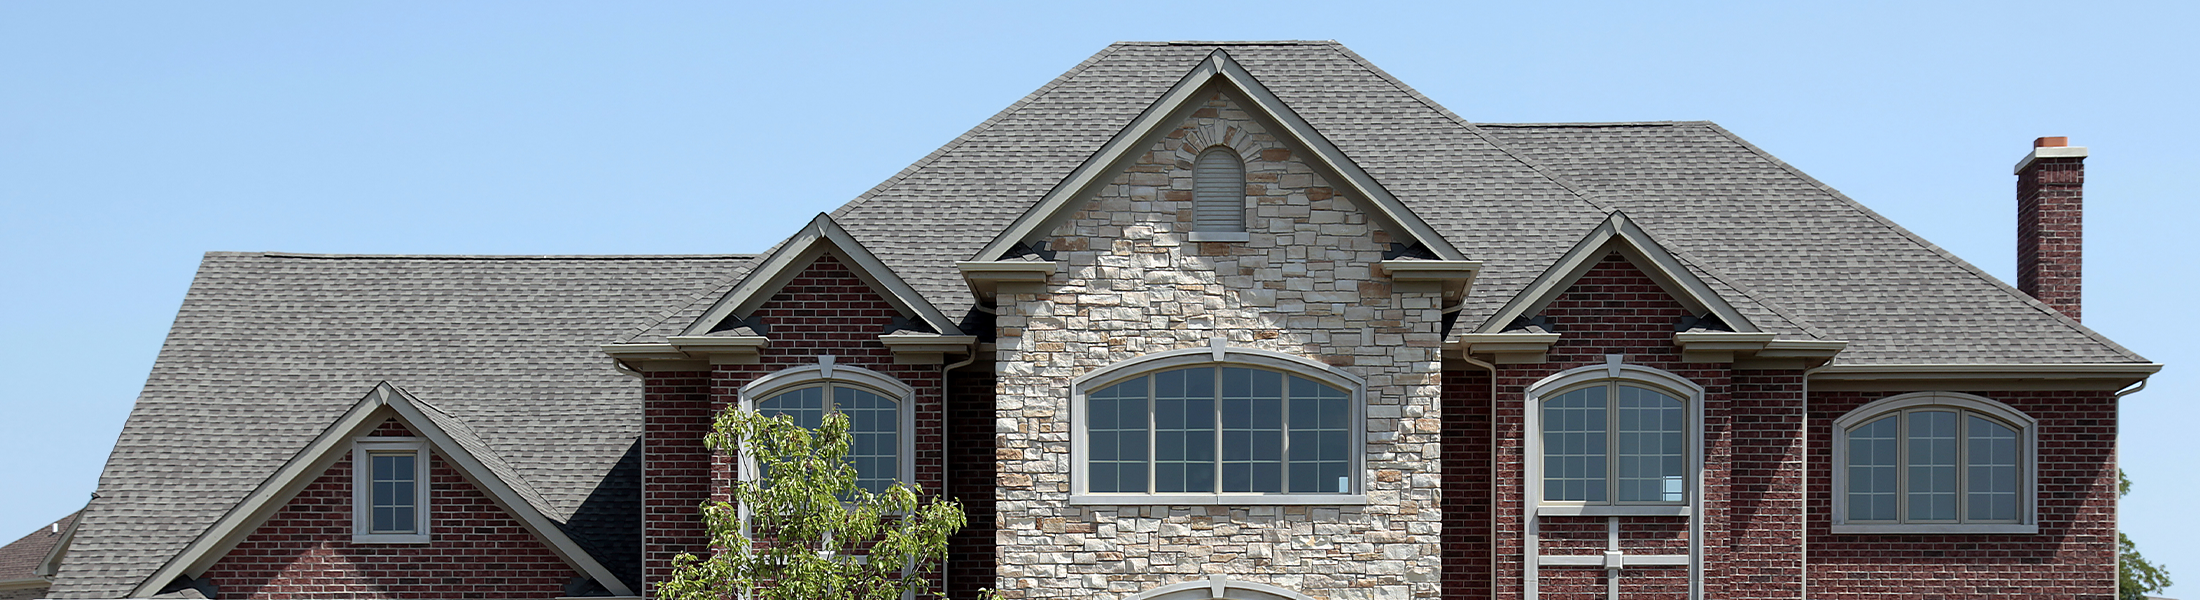 Brick home with a gray shingle roof